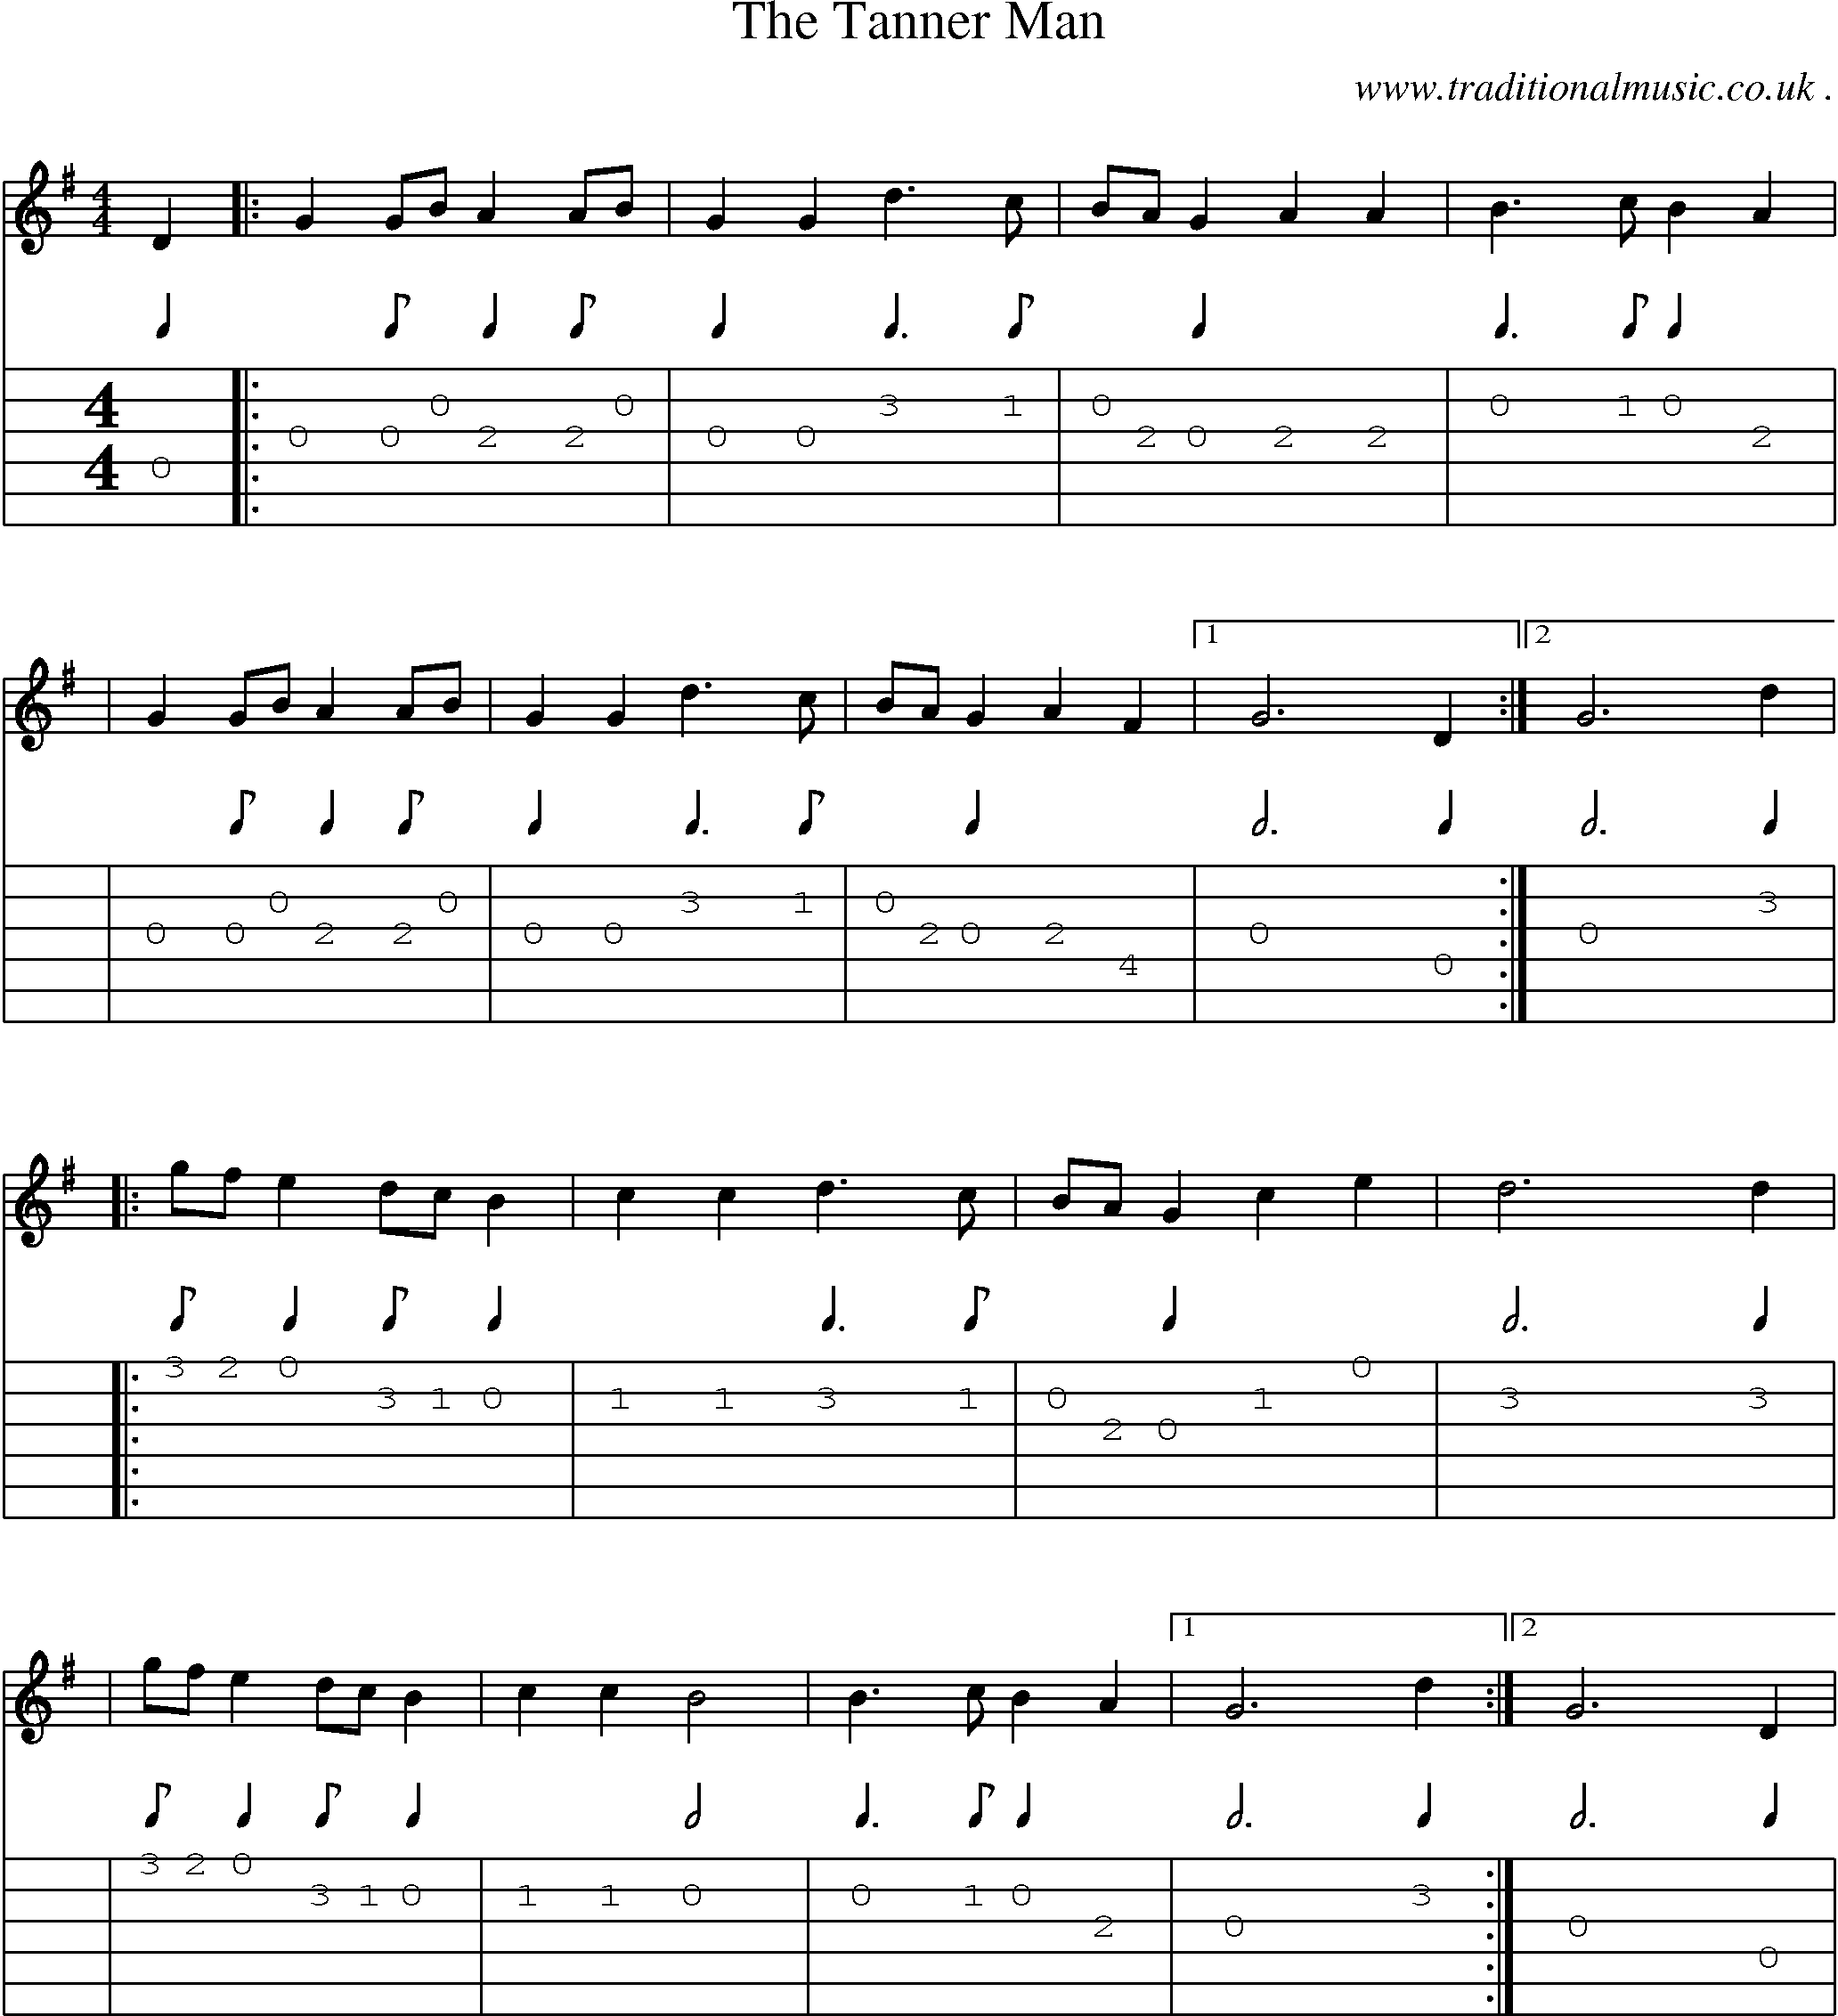 Sheet-Music and Guitar Tabs for The Tanner Man